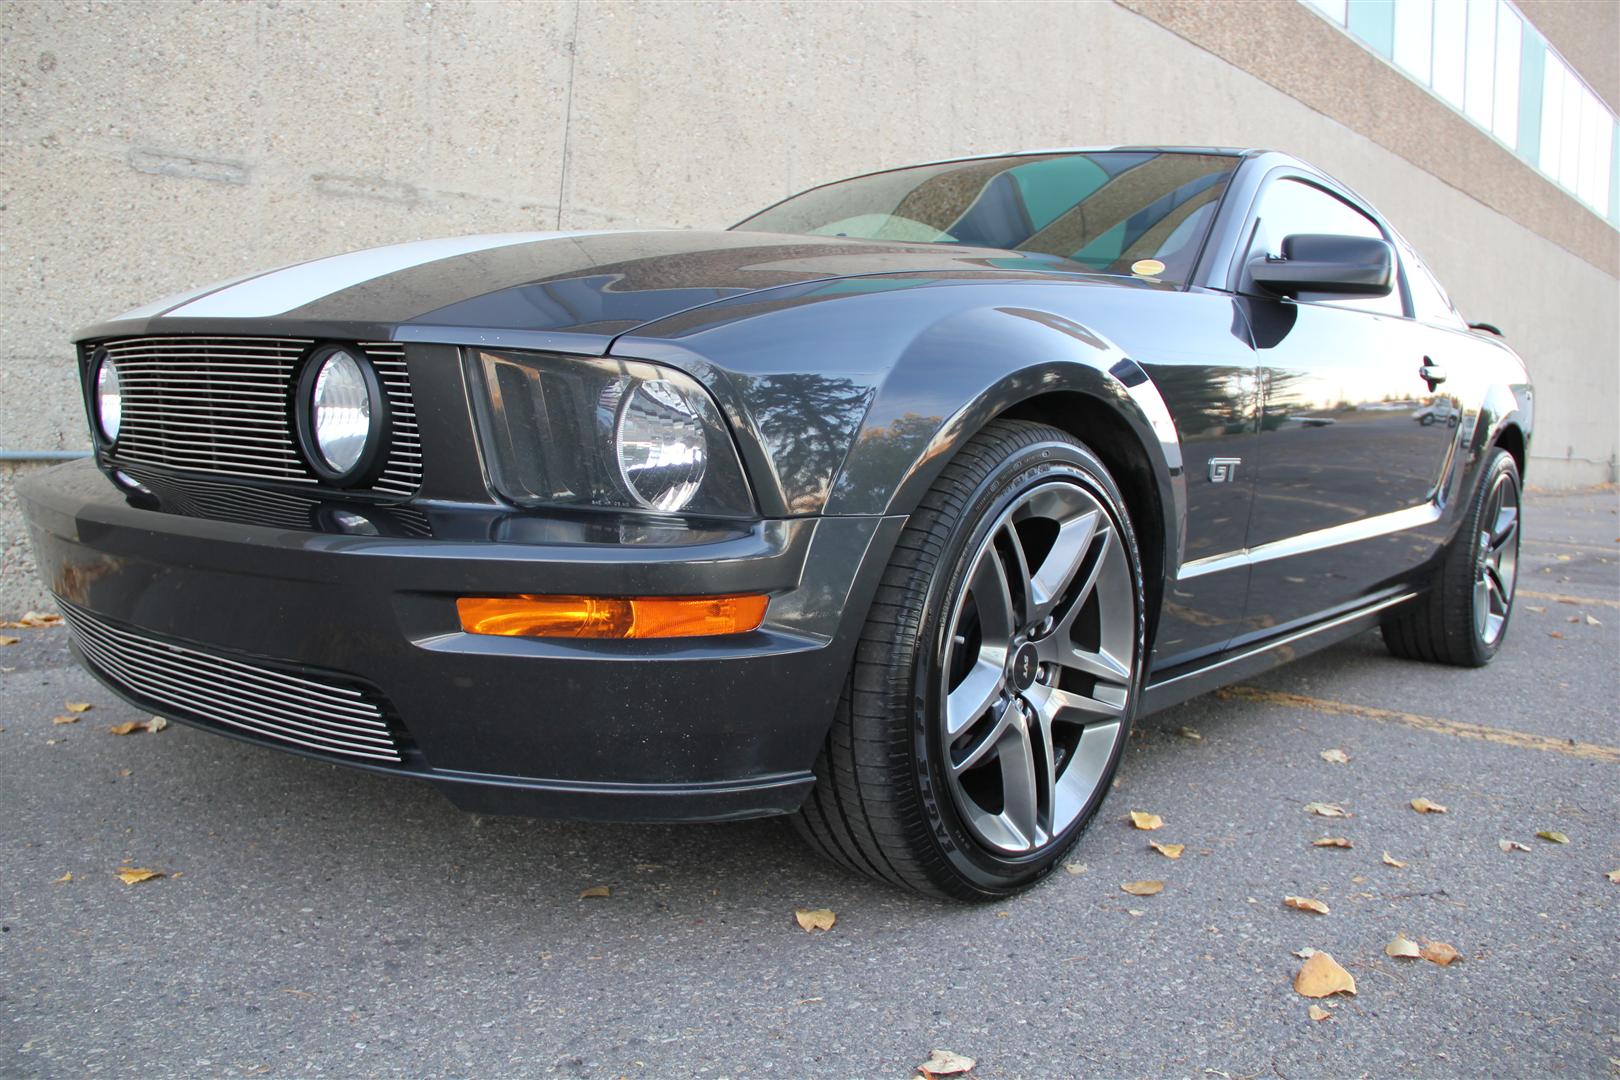 Used 2007 Ford Mustang Pricing & Features - Edmunds.com